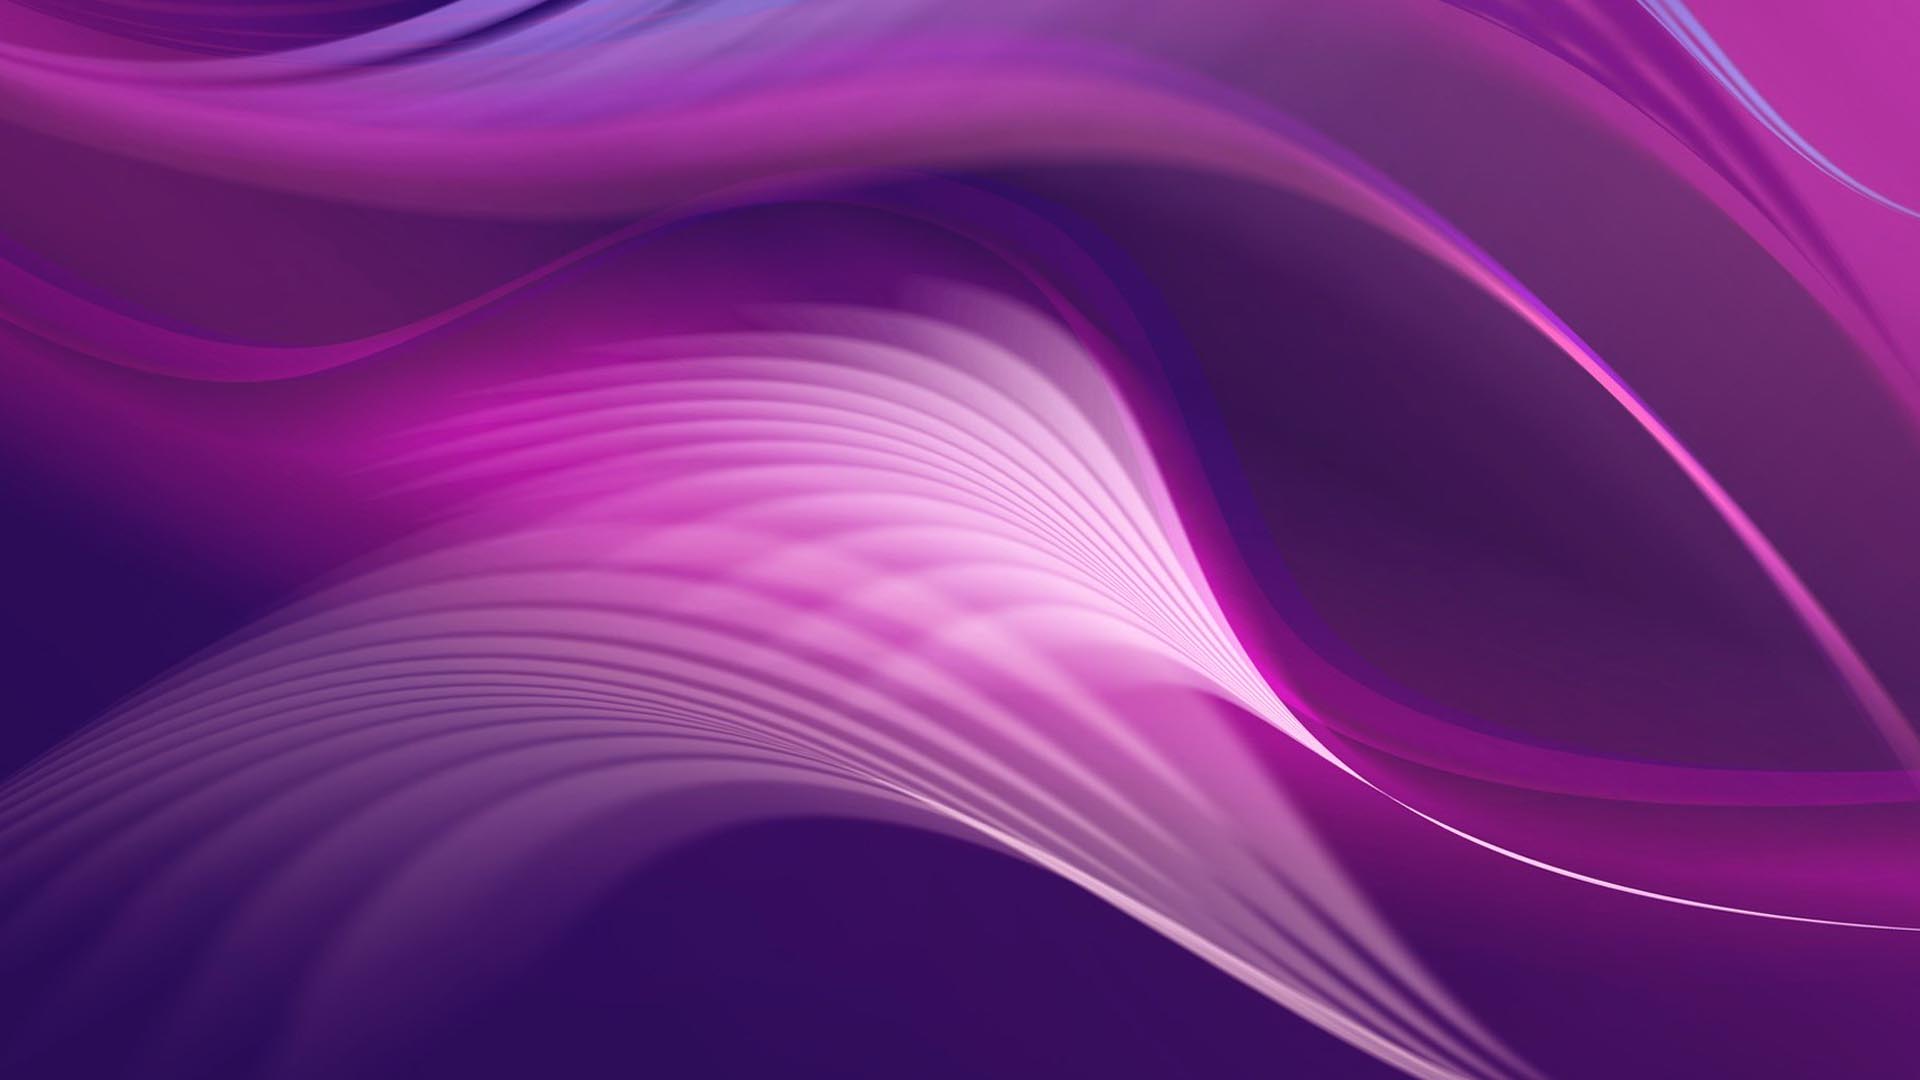 Free download Purple Abstract Fractal Wallpaper Choice Wallpaper